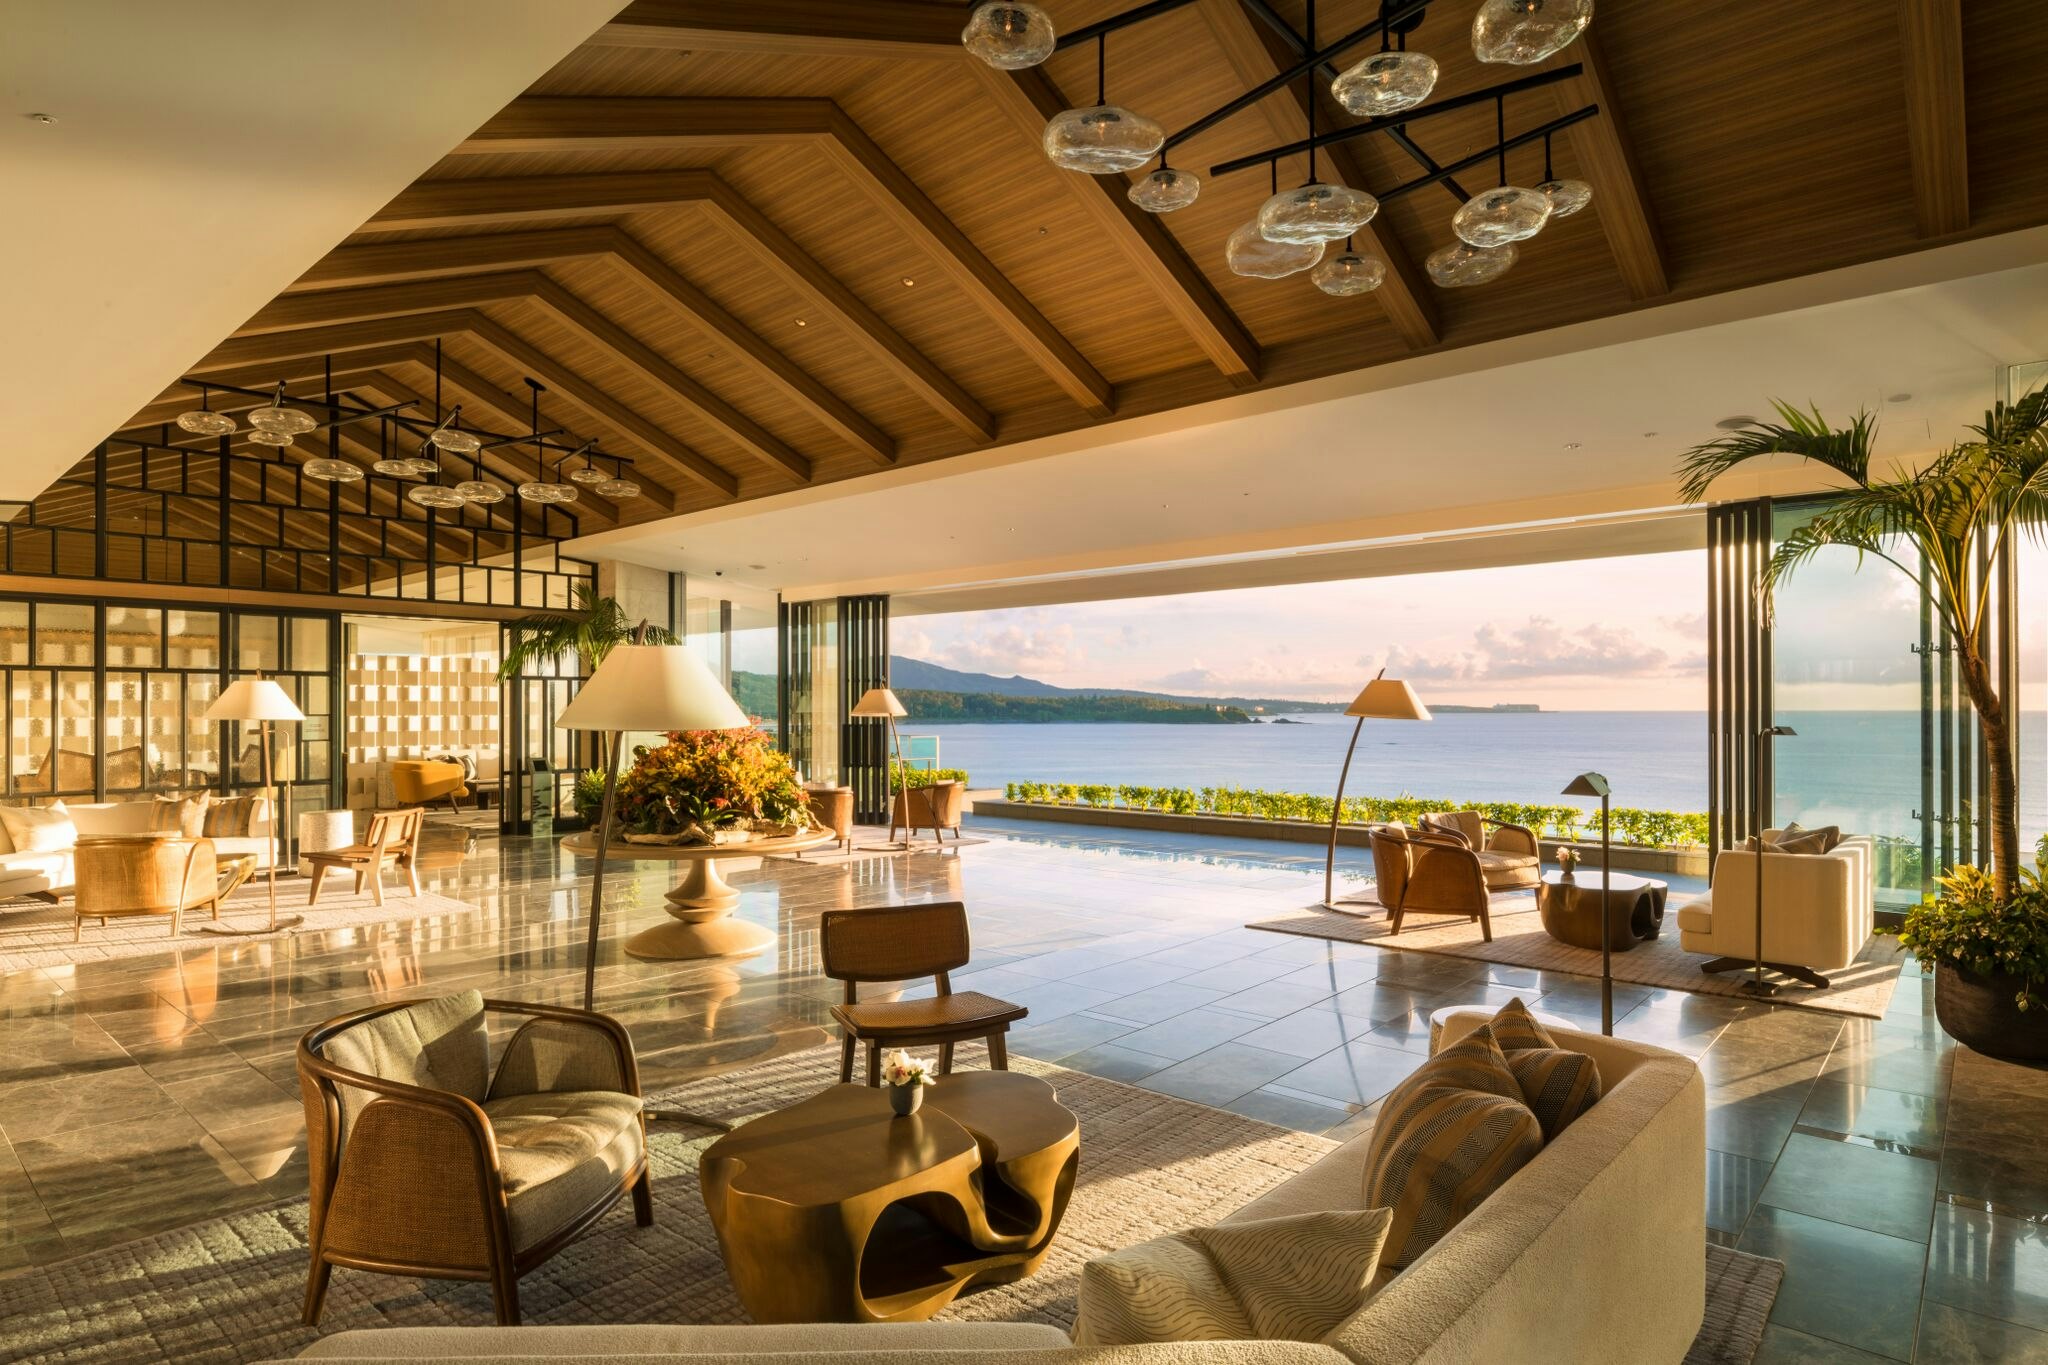 Guests can enjoy spectacular views for the Sunset Lobby